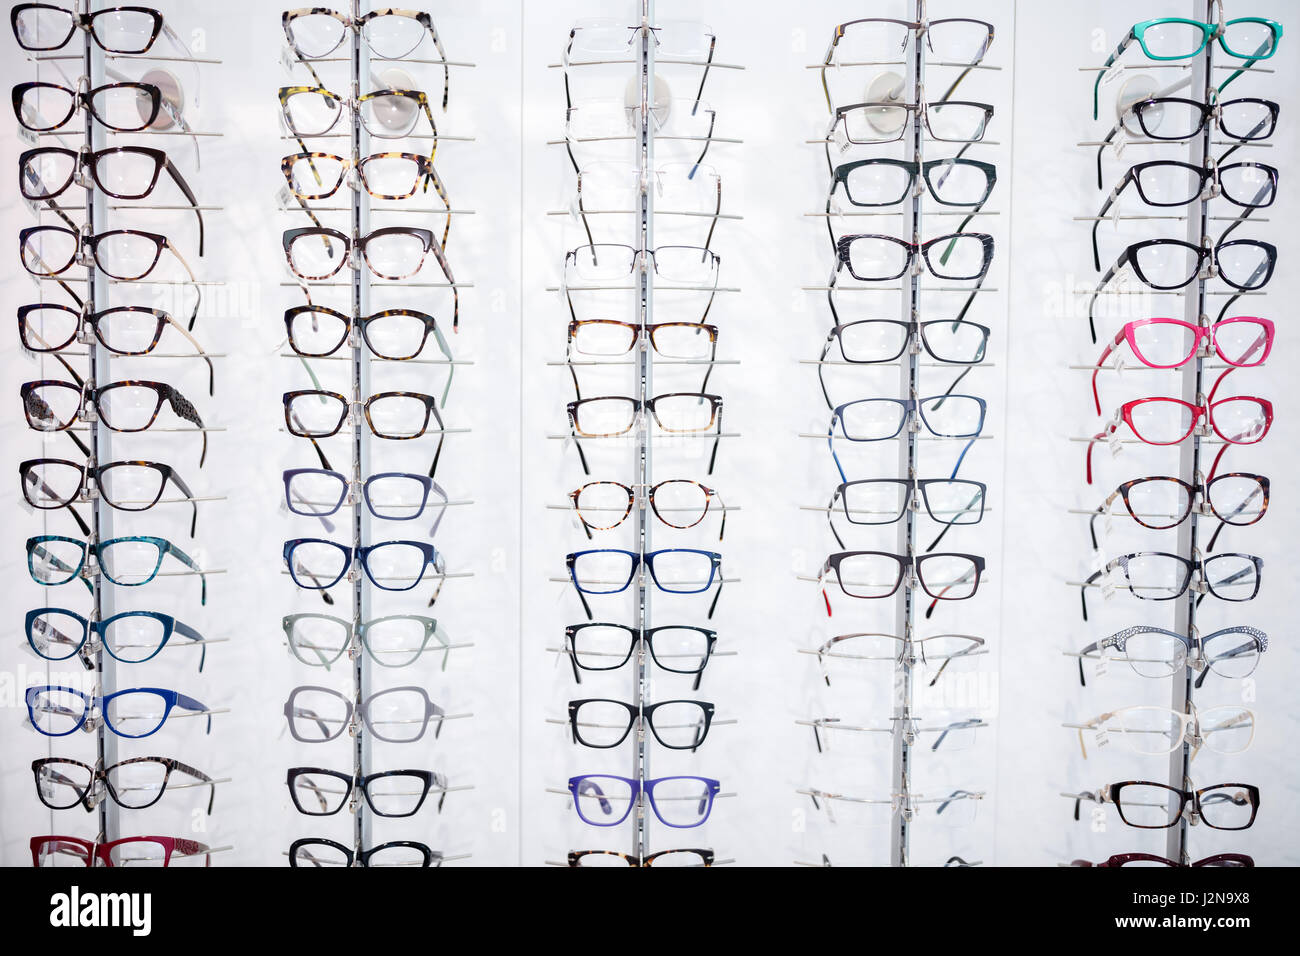 In eyewear shop can be seen large selection of frames for eyeglasses Stock Photo